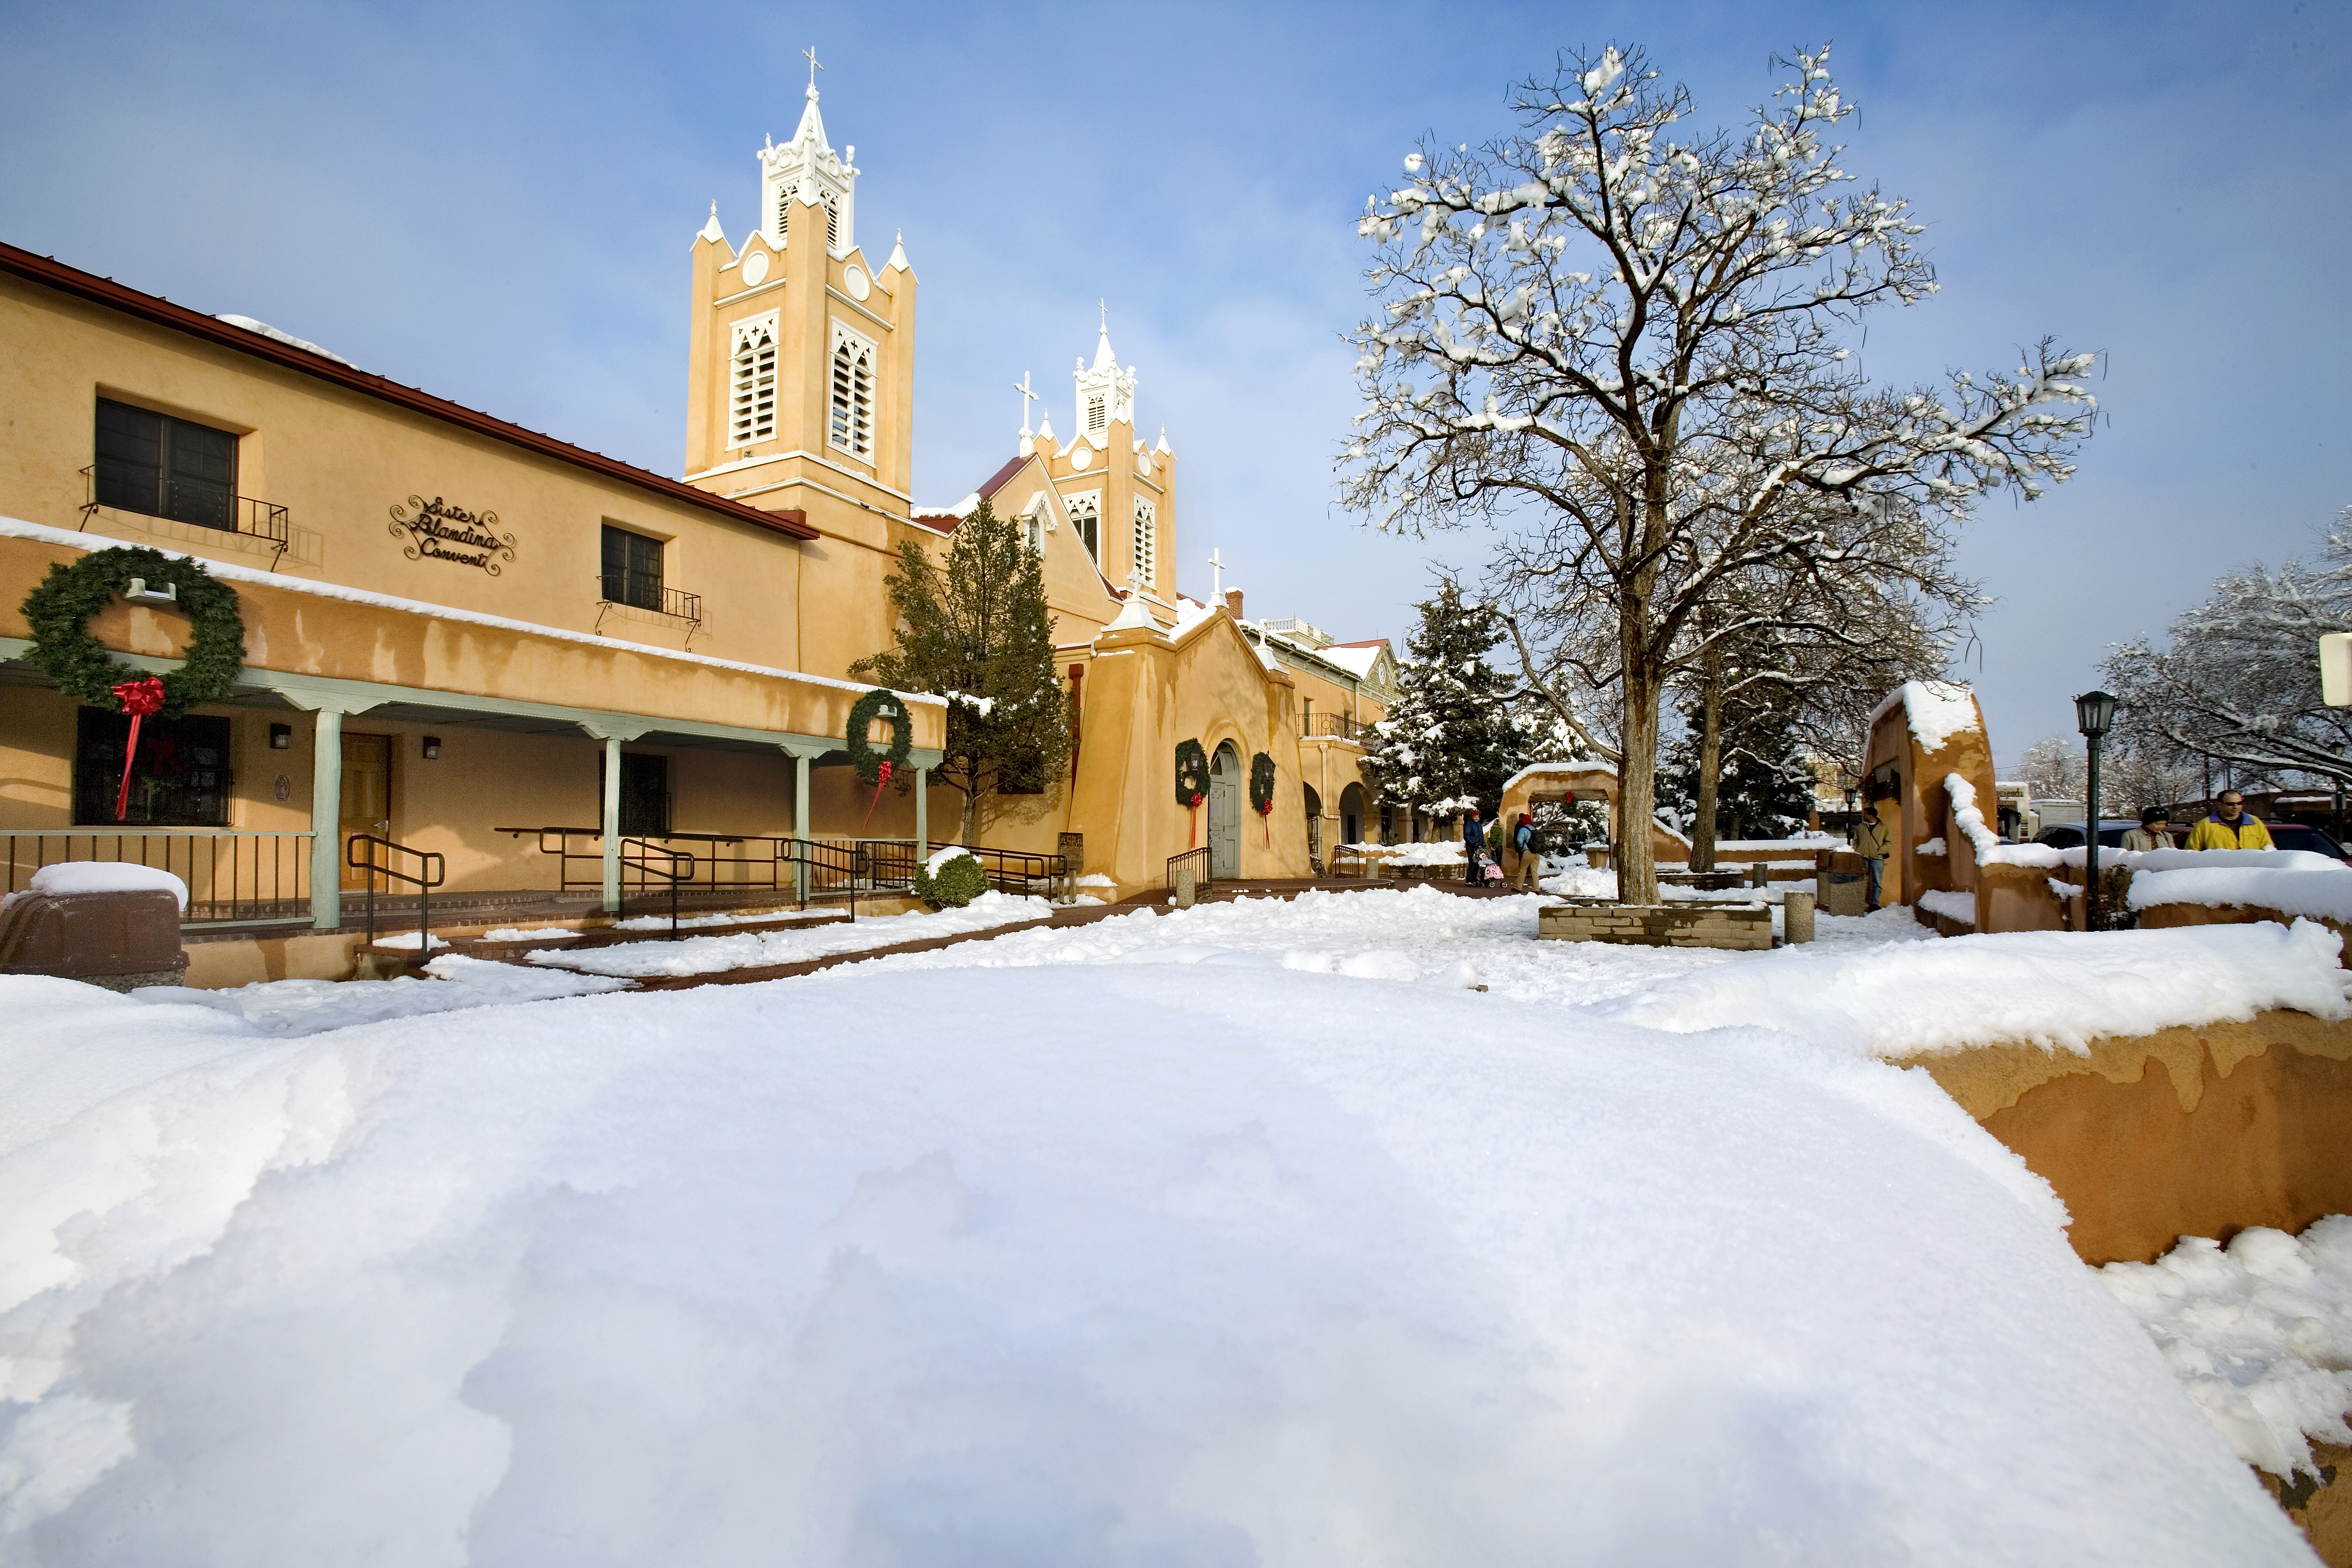 Things To Do In Winter In Albuquerque